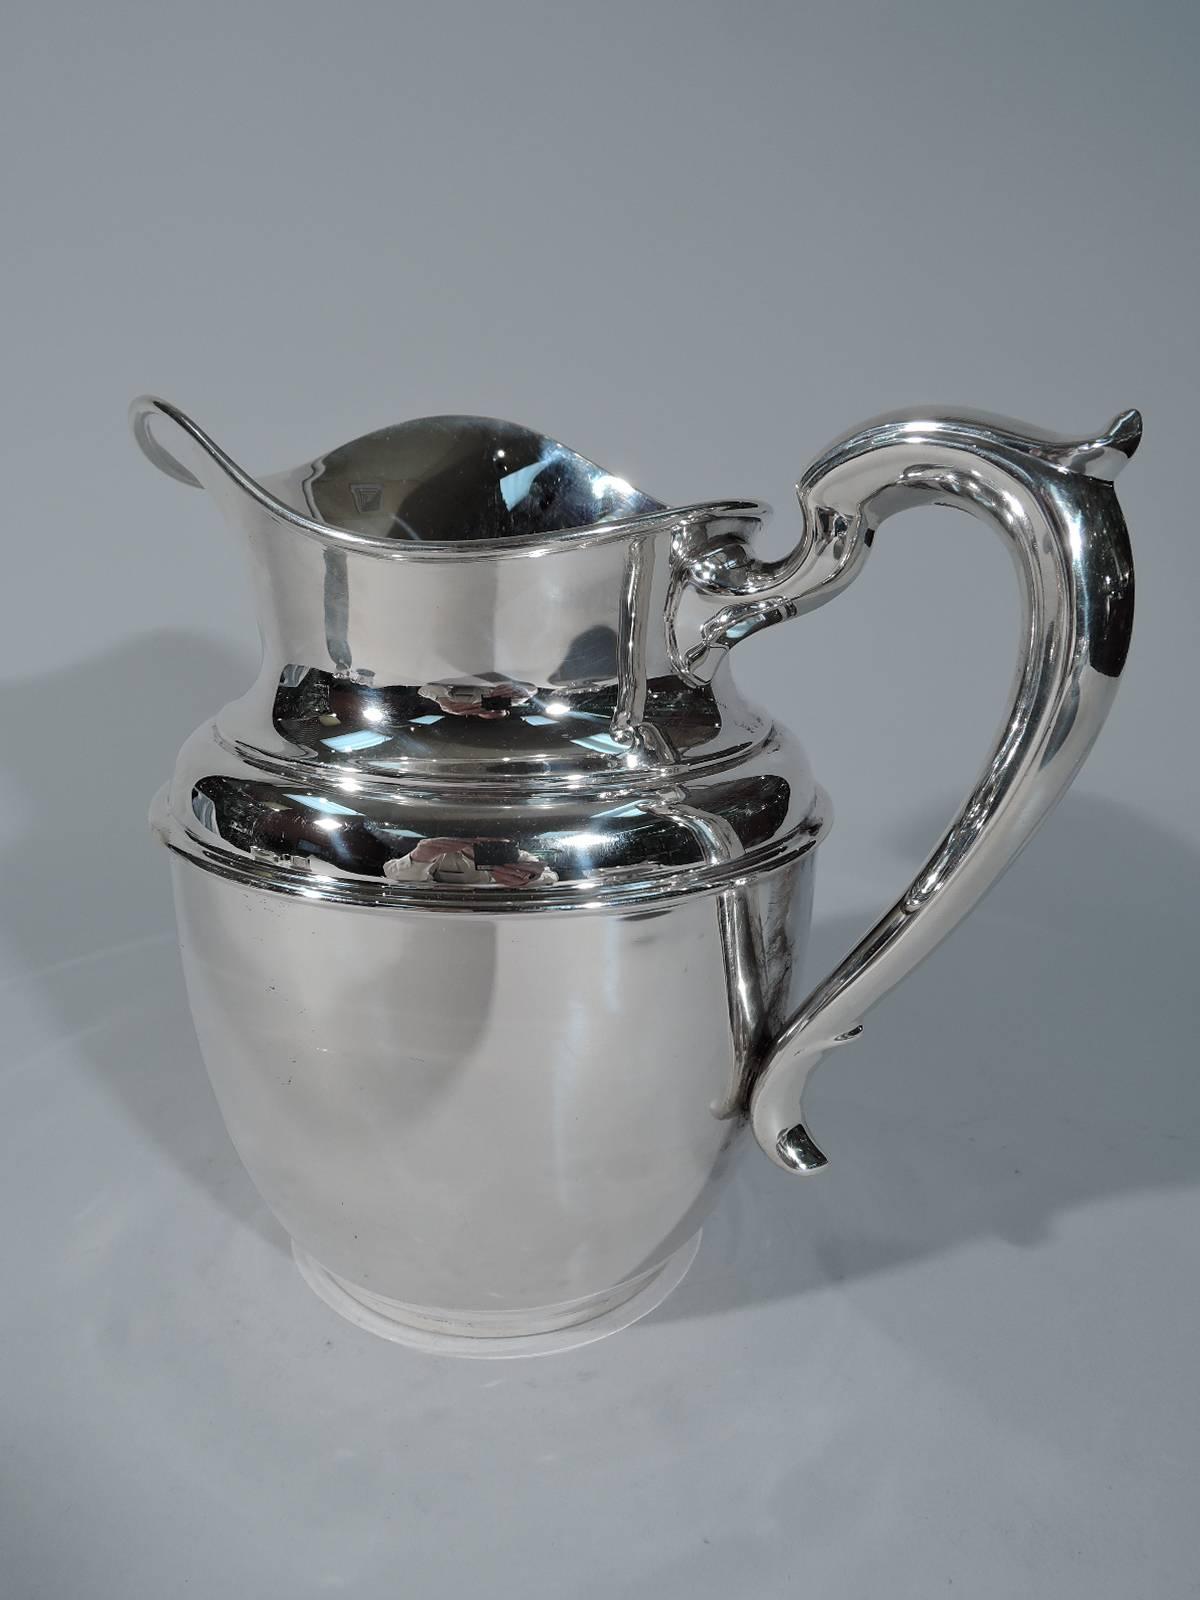 Clean-looking sterling silver water pitcher. Retailed by Tiffany & Co. in New York, circa 1920. Bulbous body with helmet mouth and capped scroll handle. Hallmark includes no. 980. Very good condition. Dimensions: H 7 3/8 x W 8 3/8 x D 6 in. Heavy